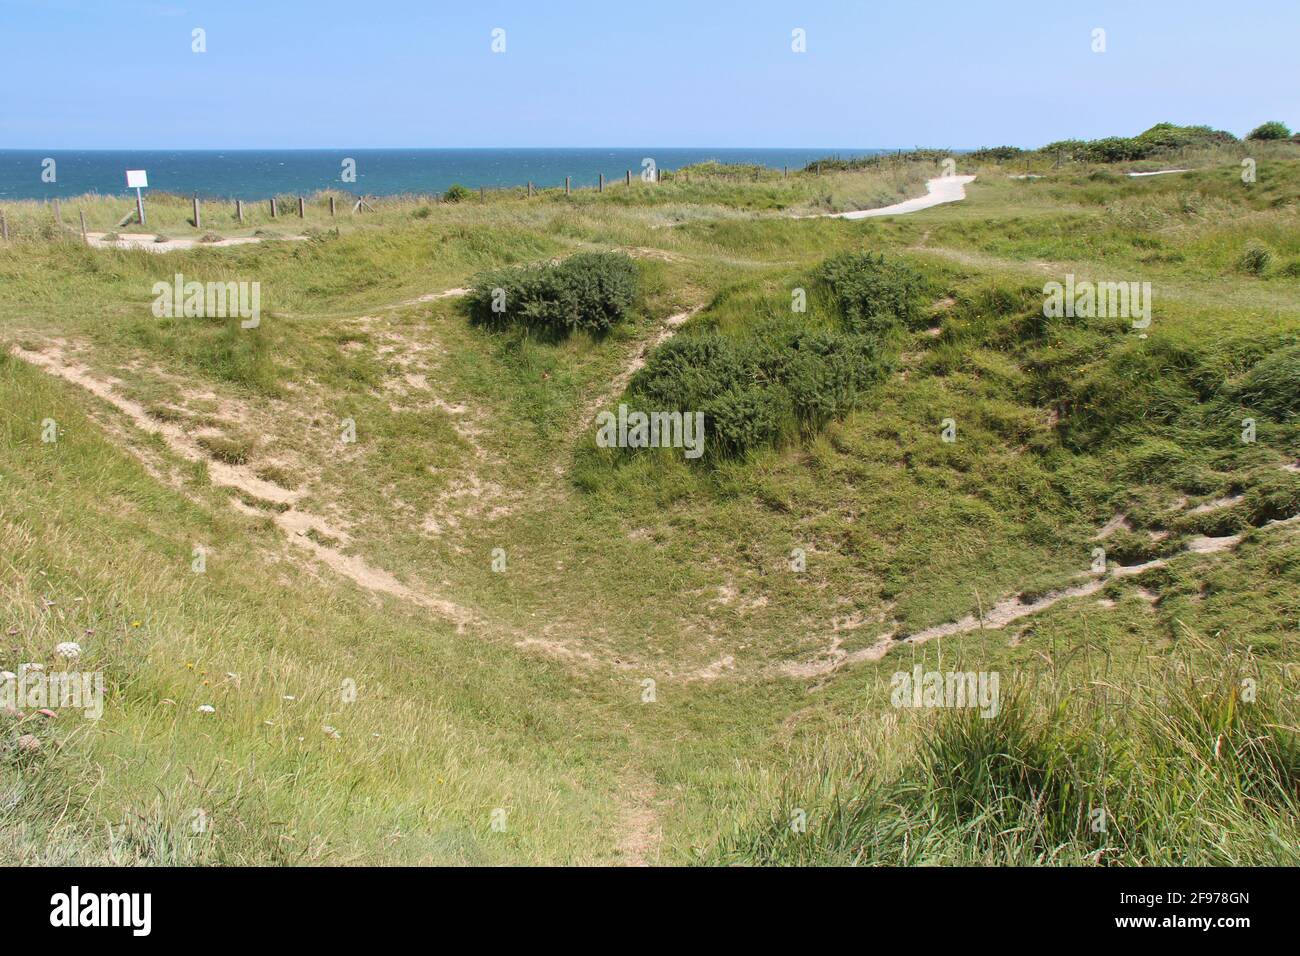 at pointe du hoc in normandy (france) Stock Photo